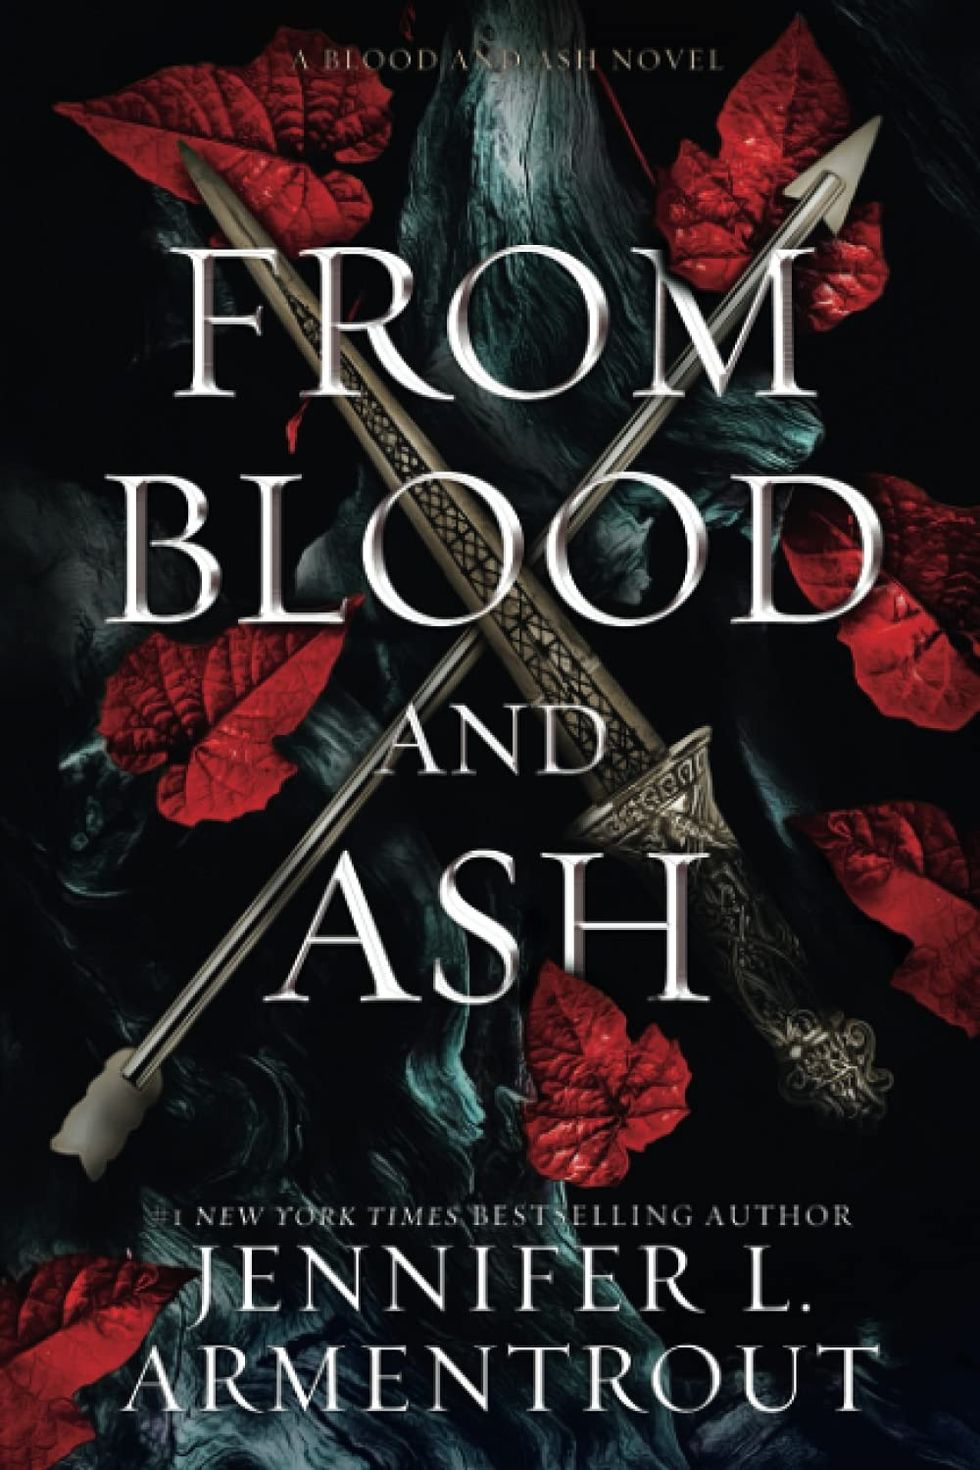 "From Blood and Ash" romantasy books